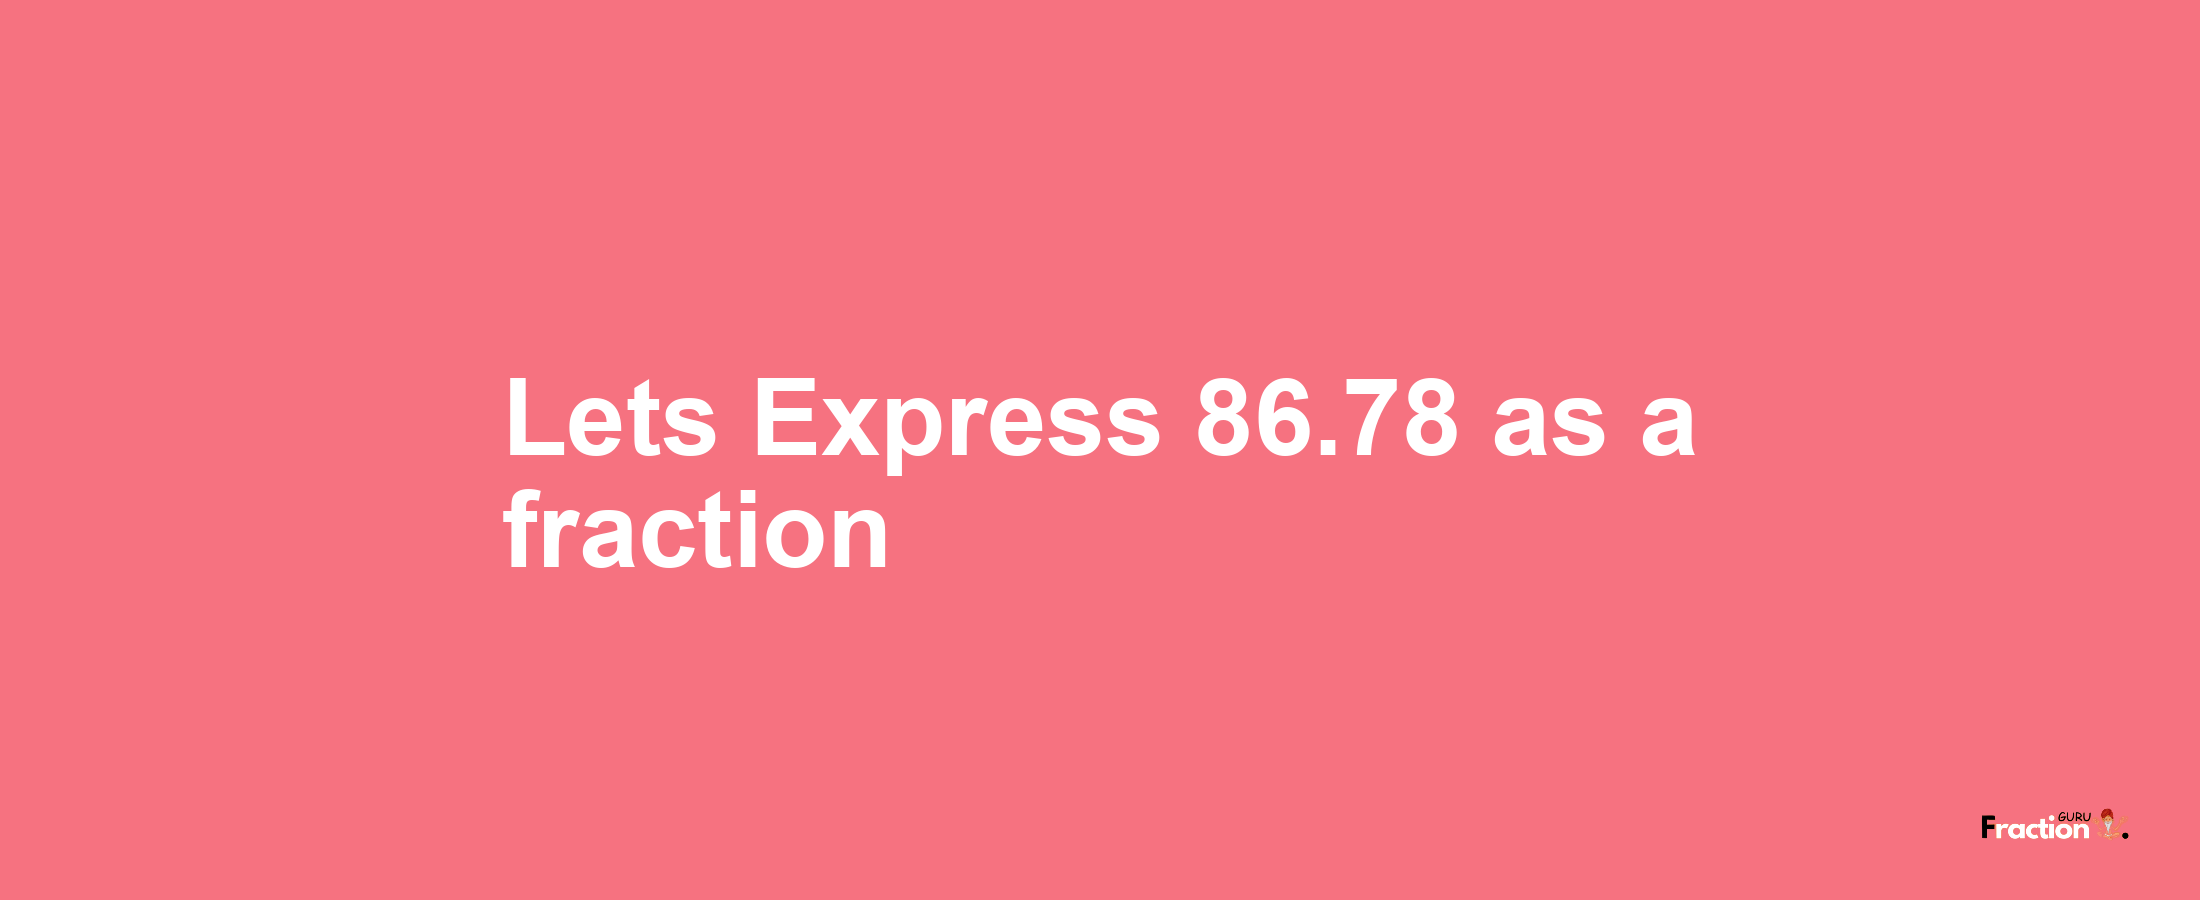 Lets Express 86.78 as afraction